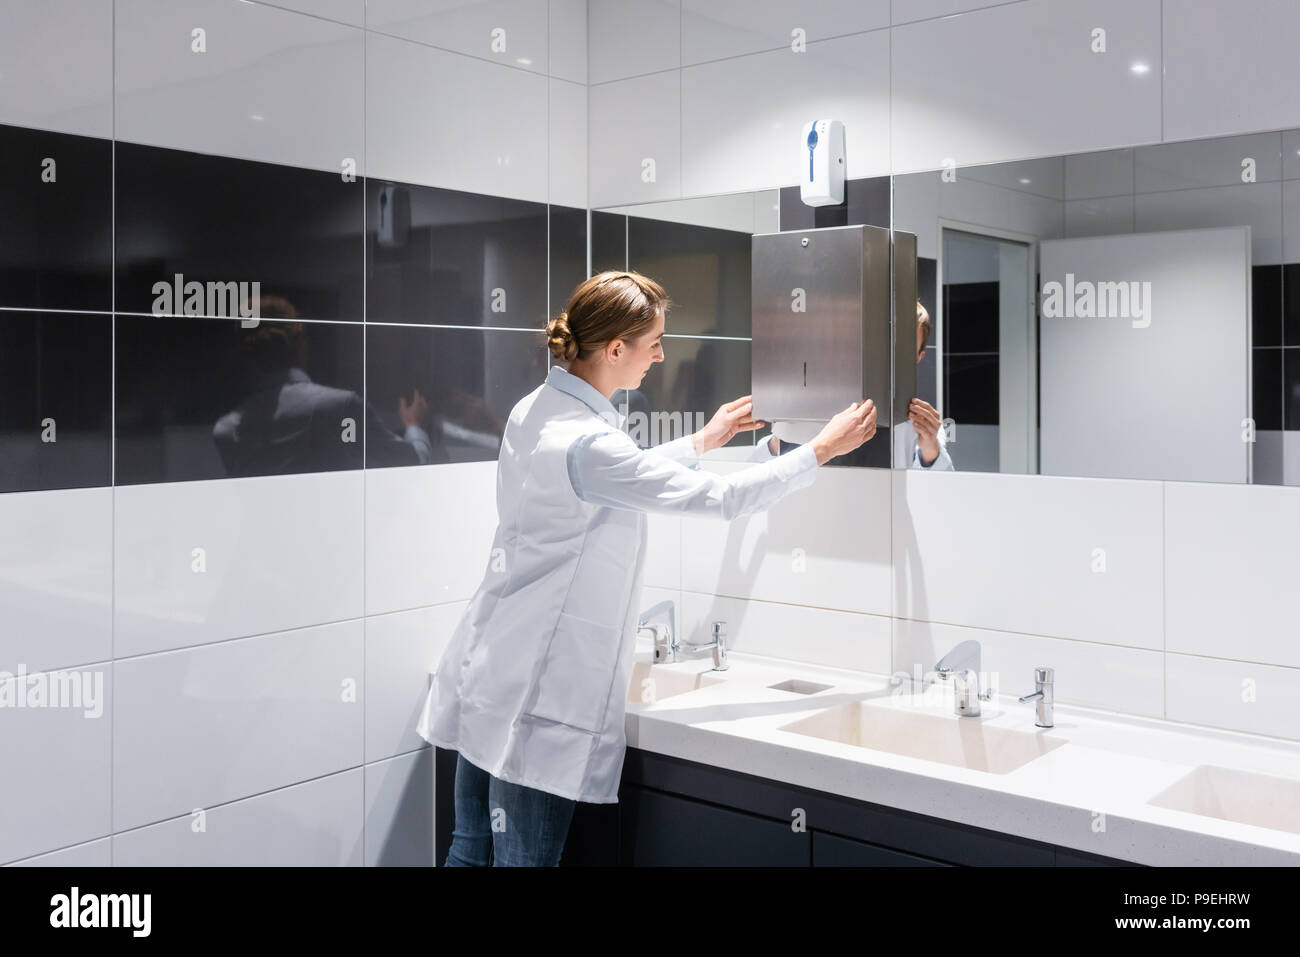 Cleaning woman refilling paper towels in public toilet  Stock Photo